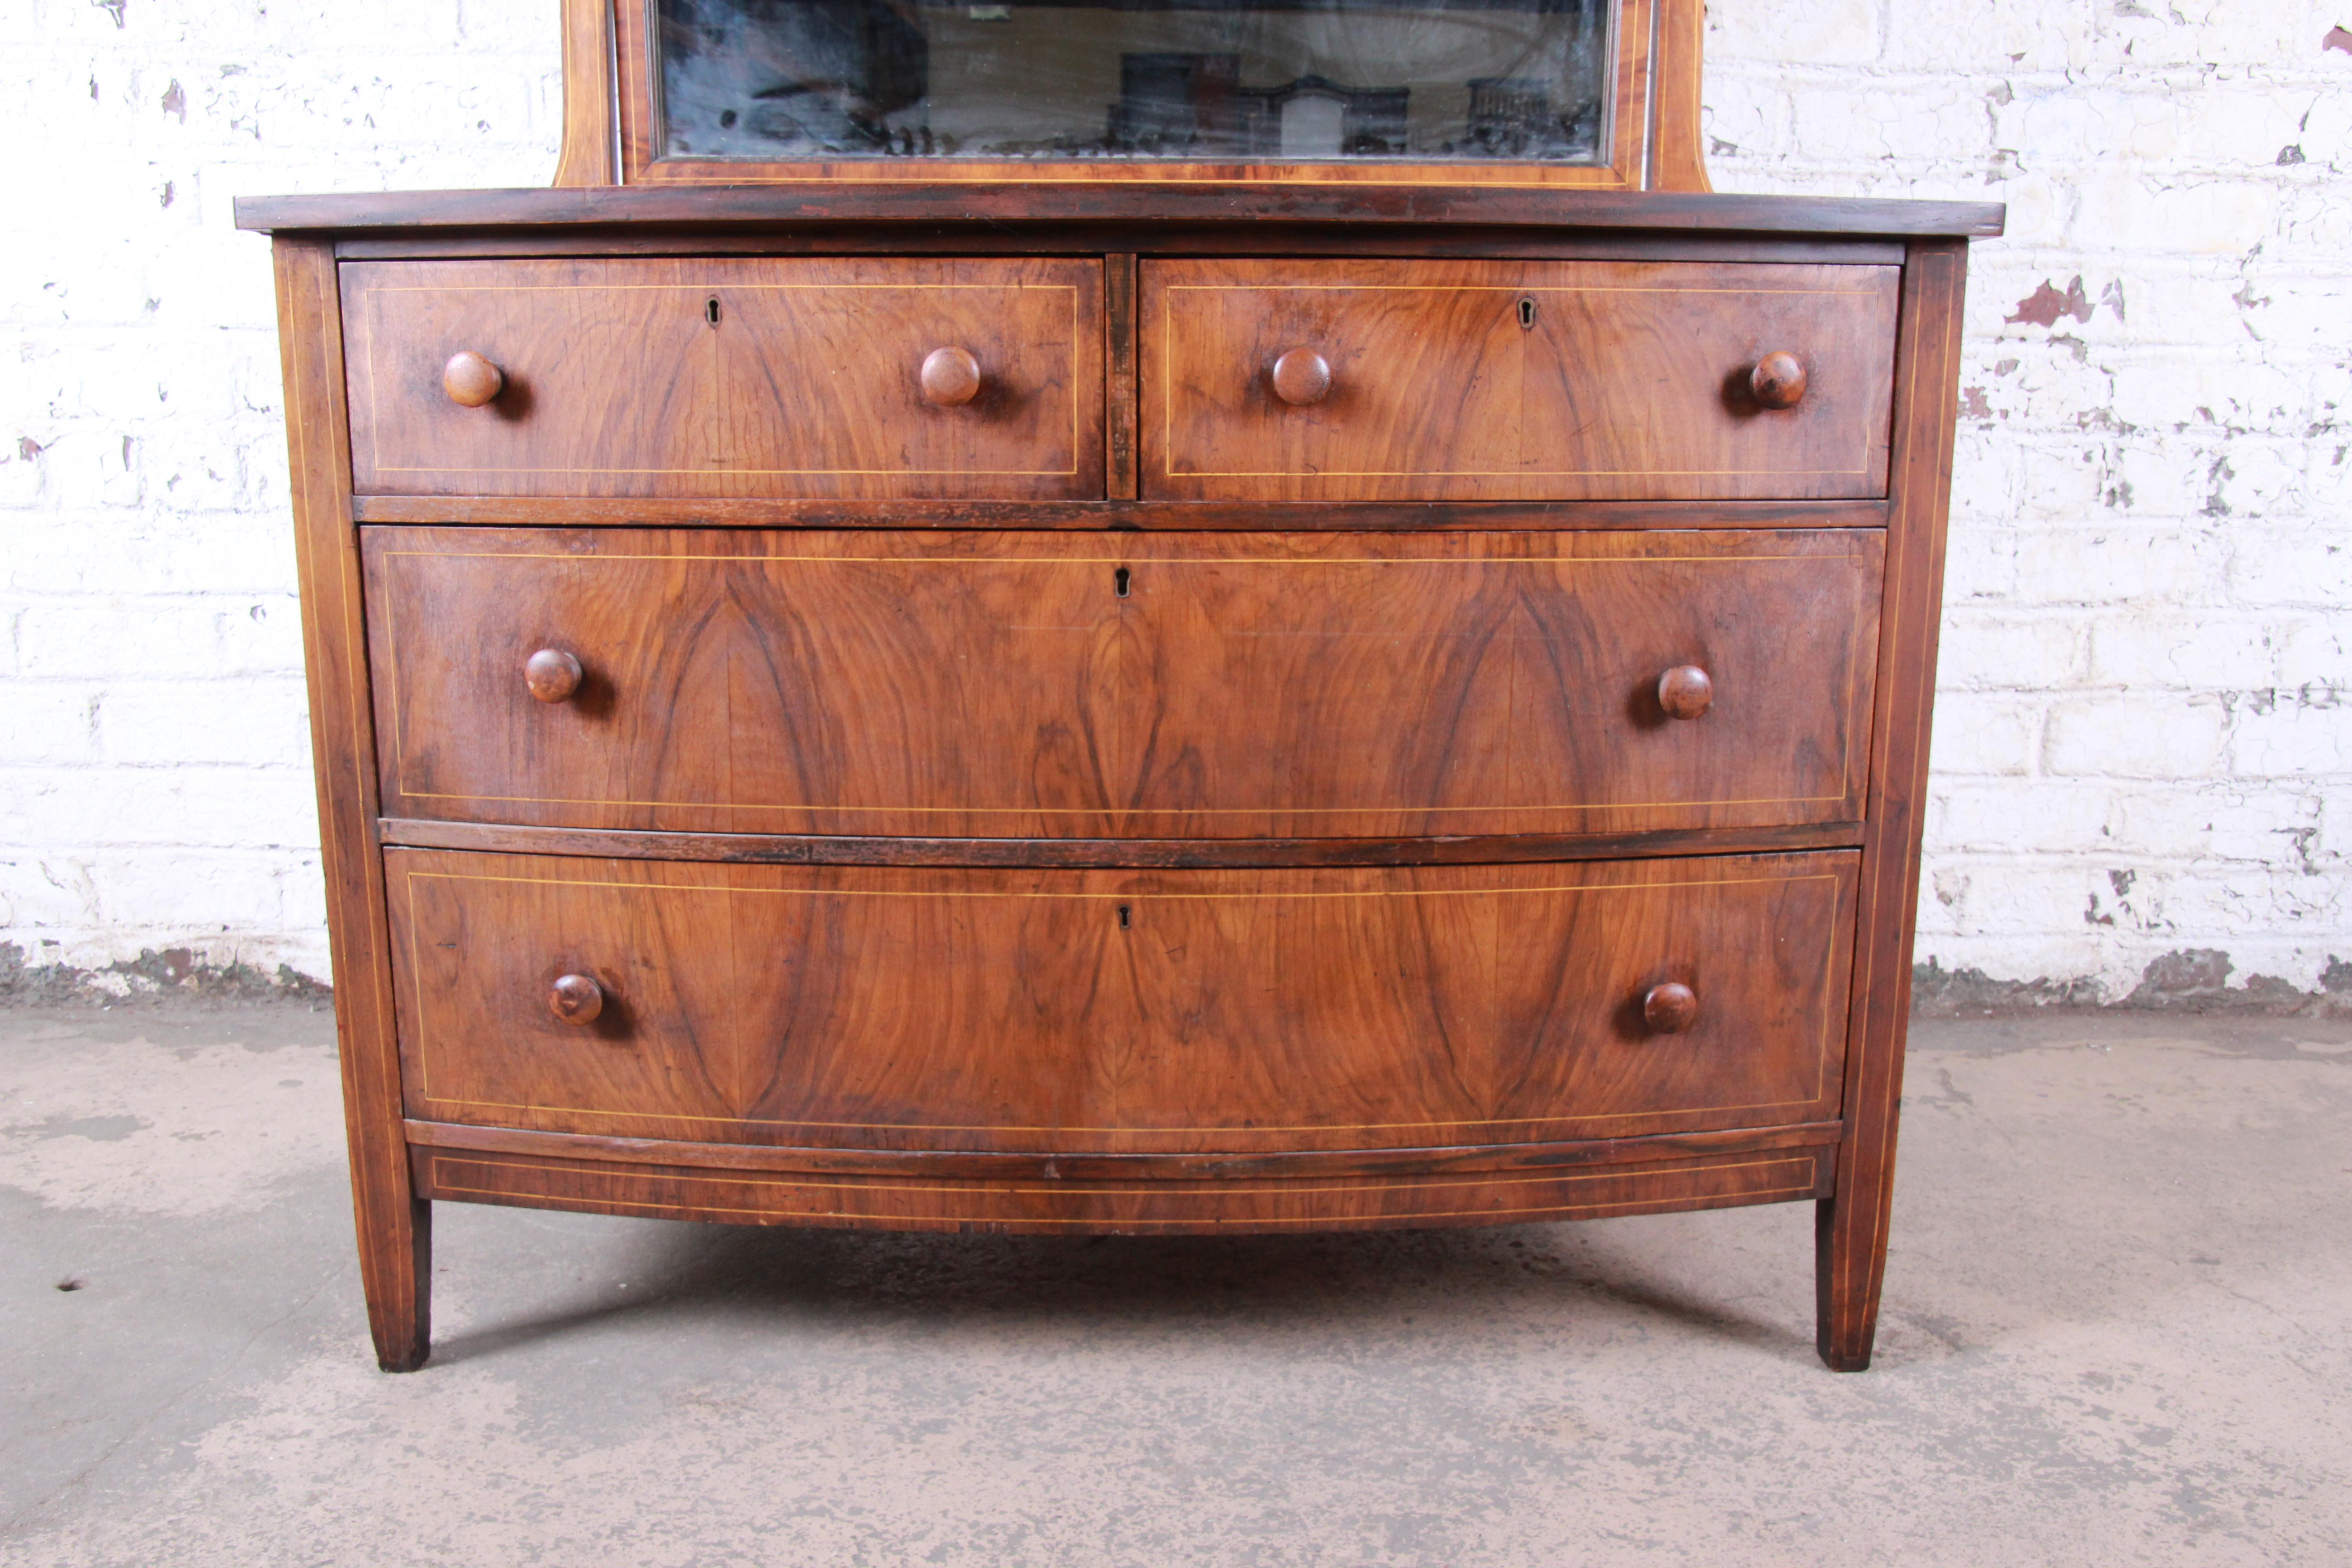 American Classical Antique Burled Walnut Bow Front Dresser with Mirror, circa 1900